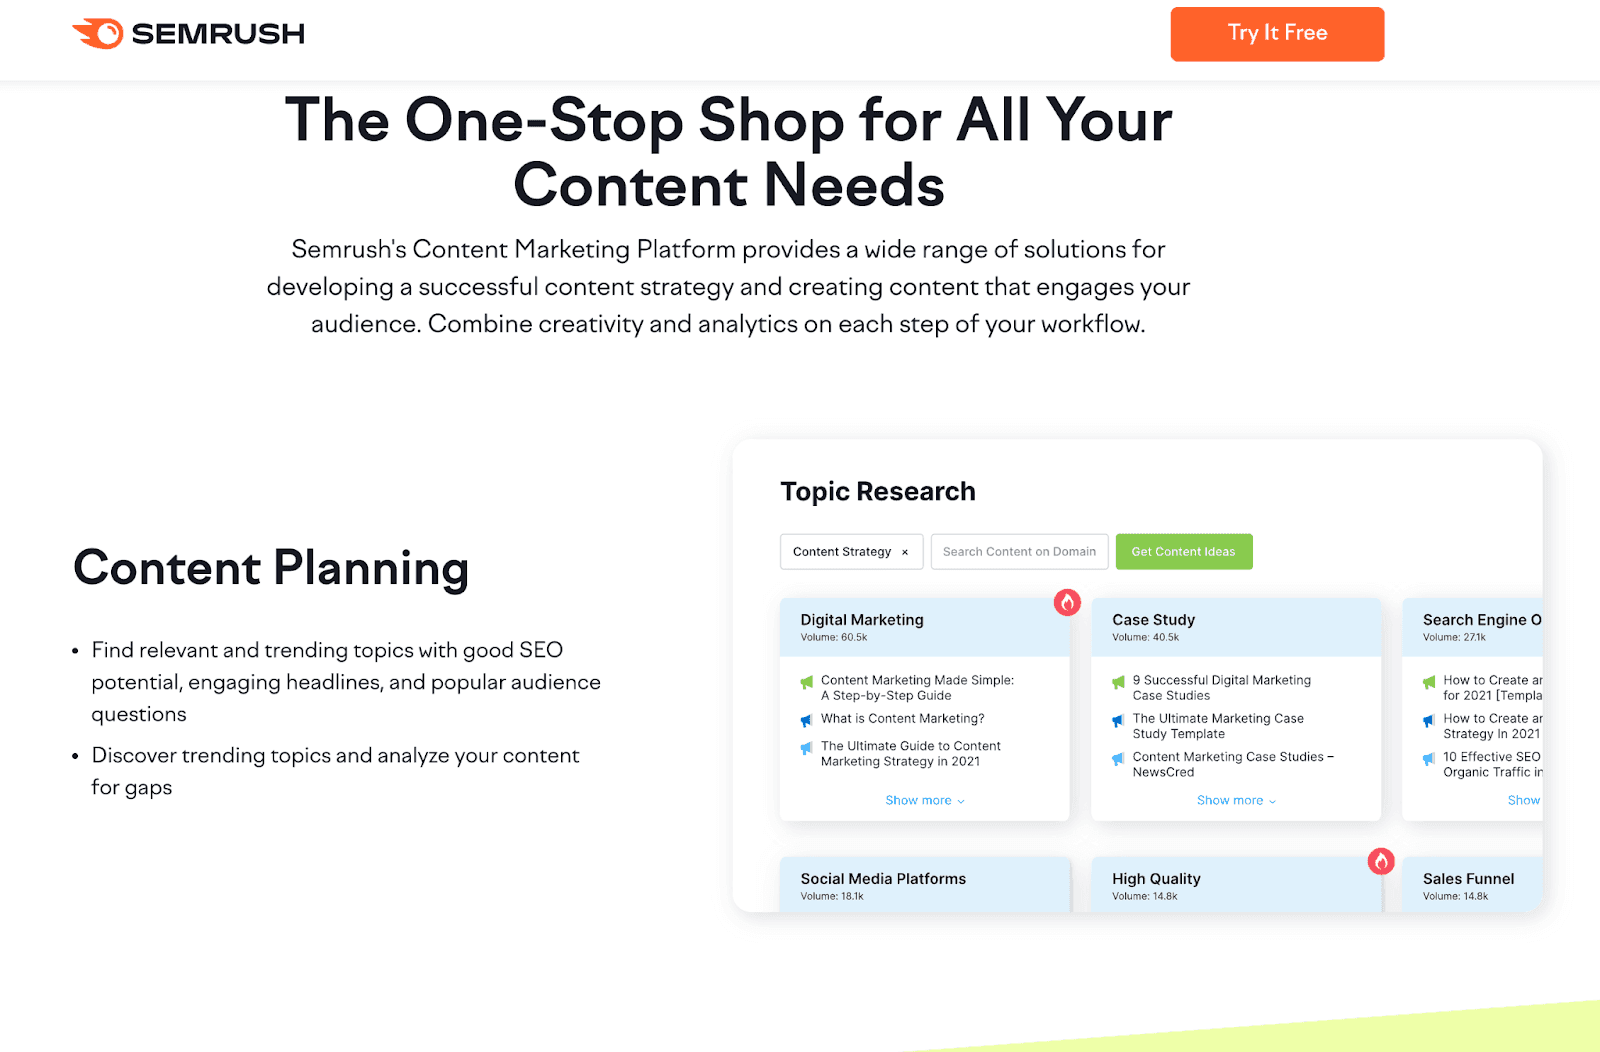 SEM Rush website - the one-stop shop for all your content needs